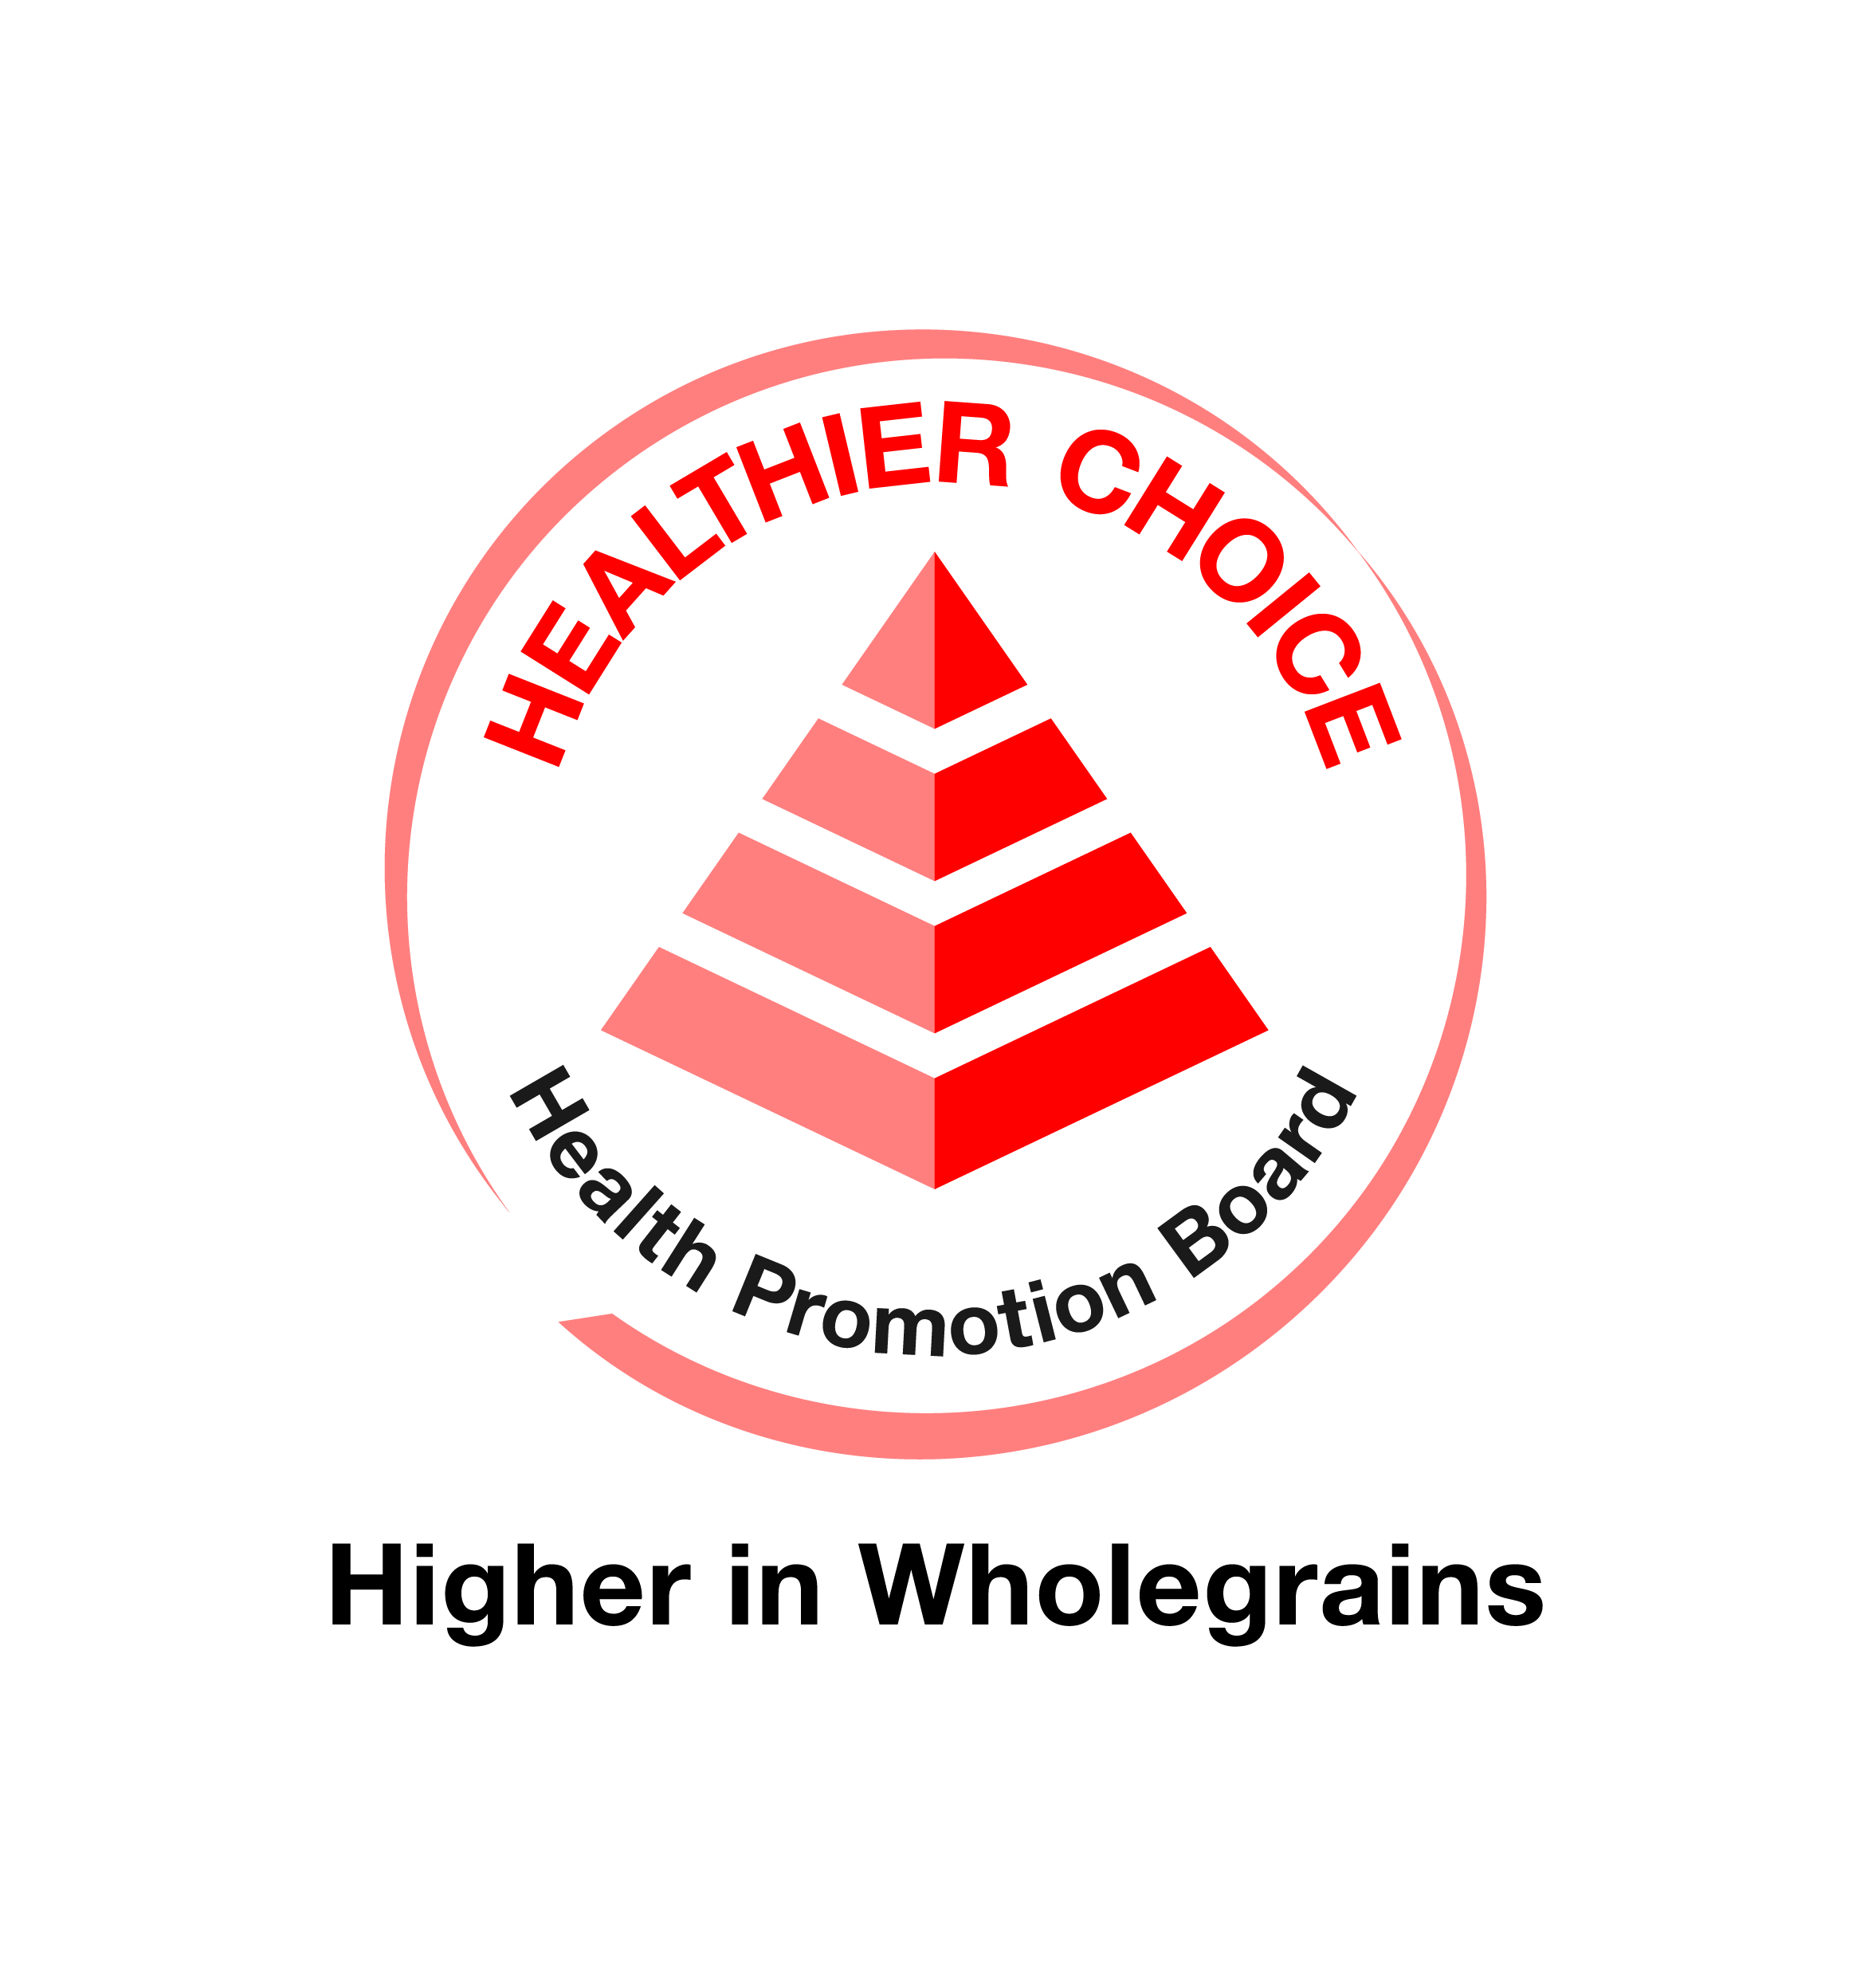 Choose wholegrains products with the healthier choice symbol.